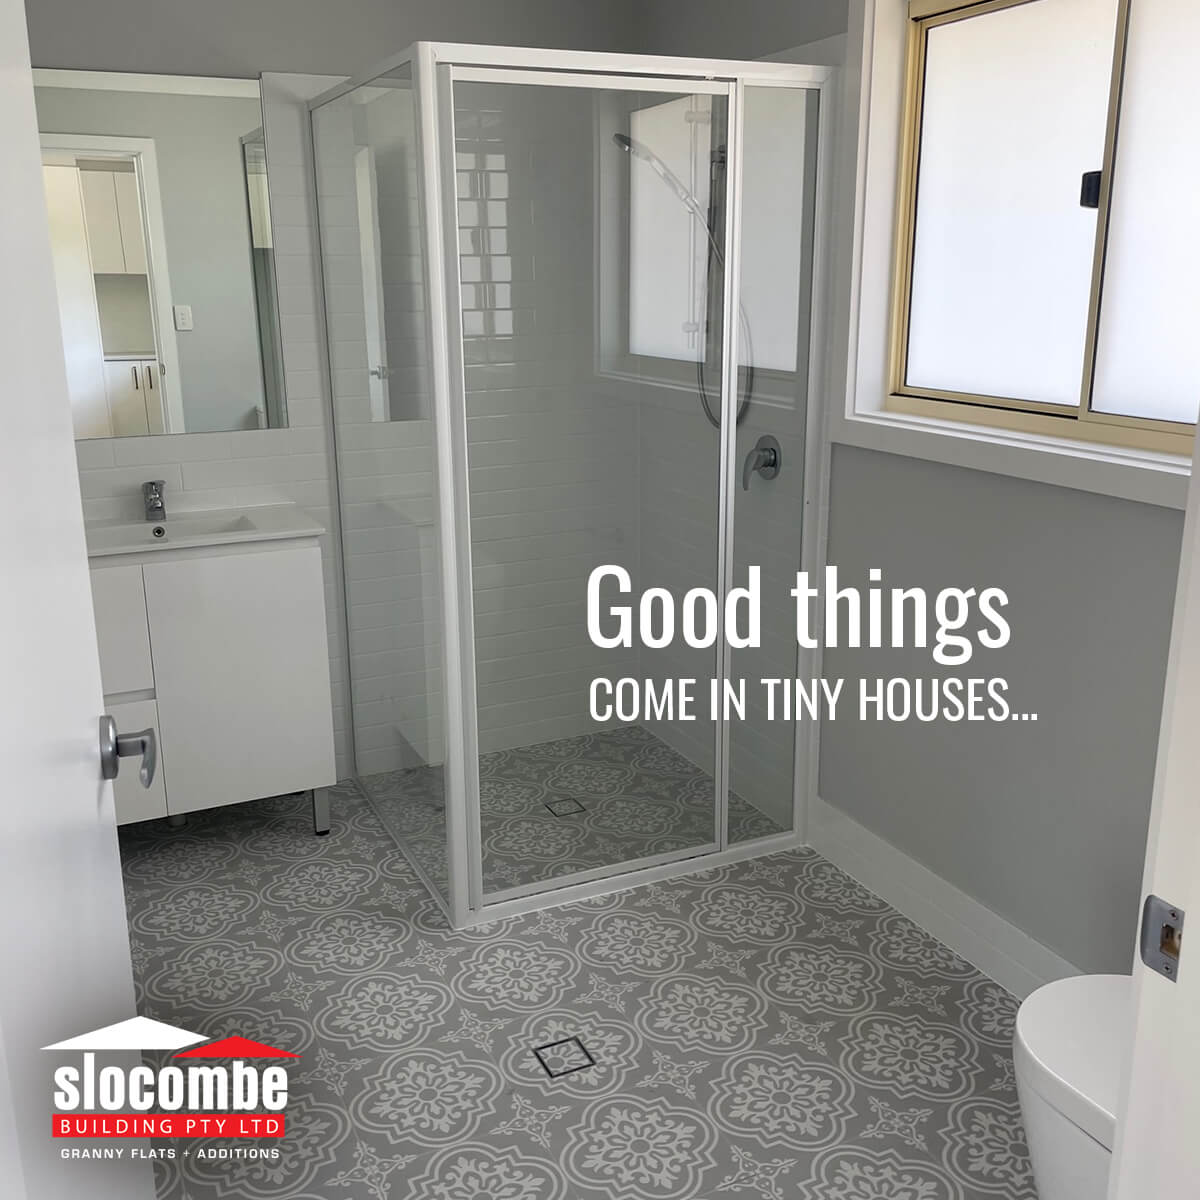 Good things come in tiny houses...built by Slocombe Building Pty Ltd